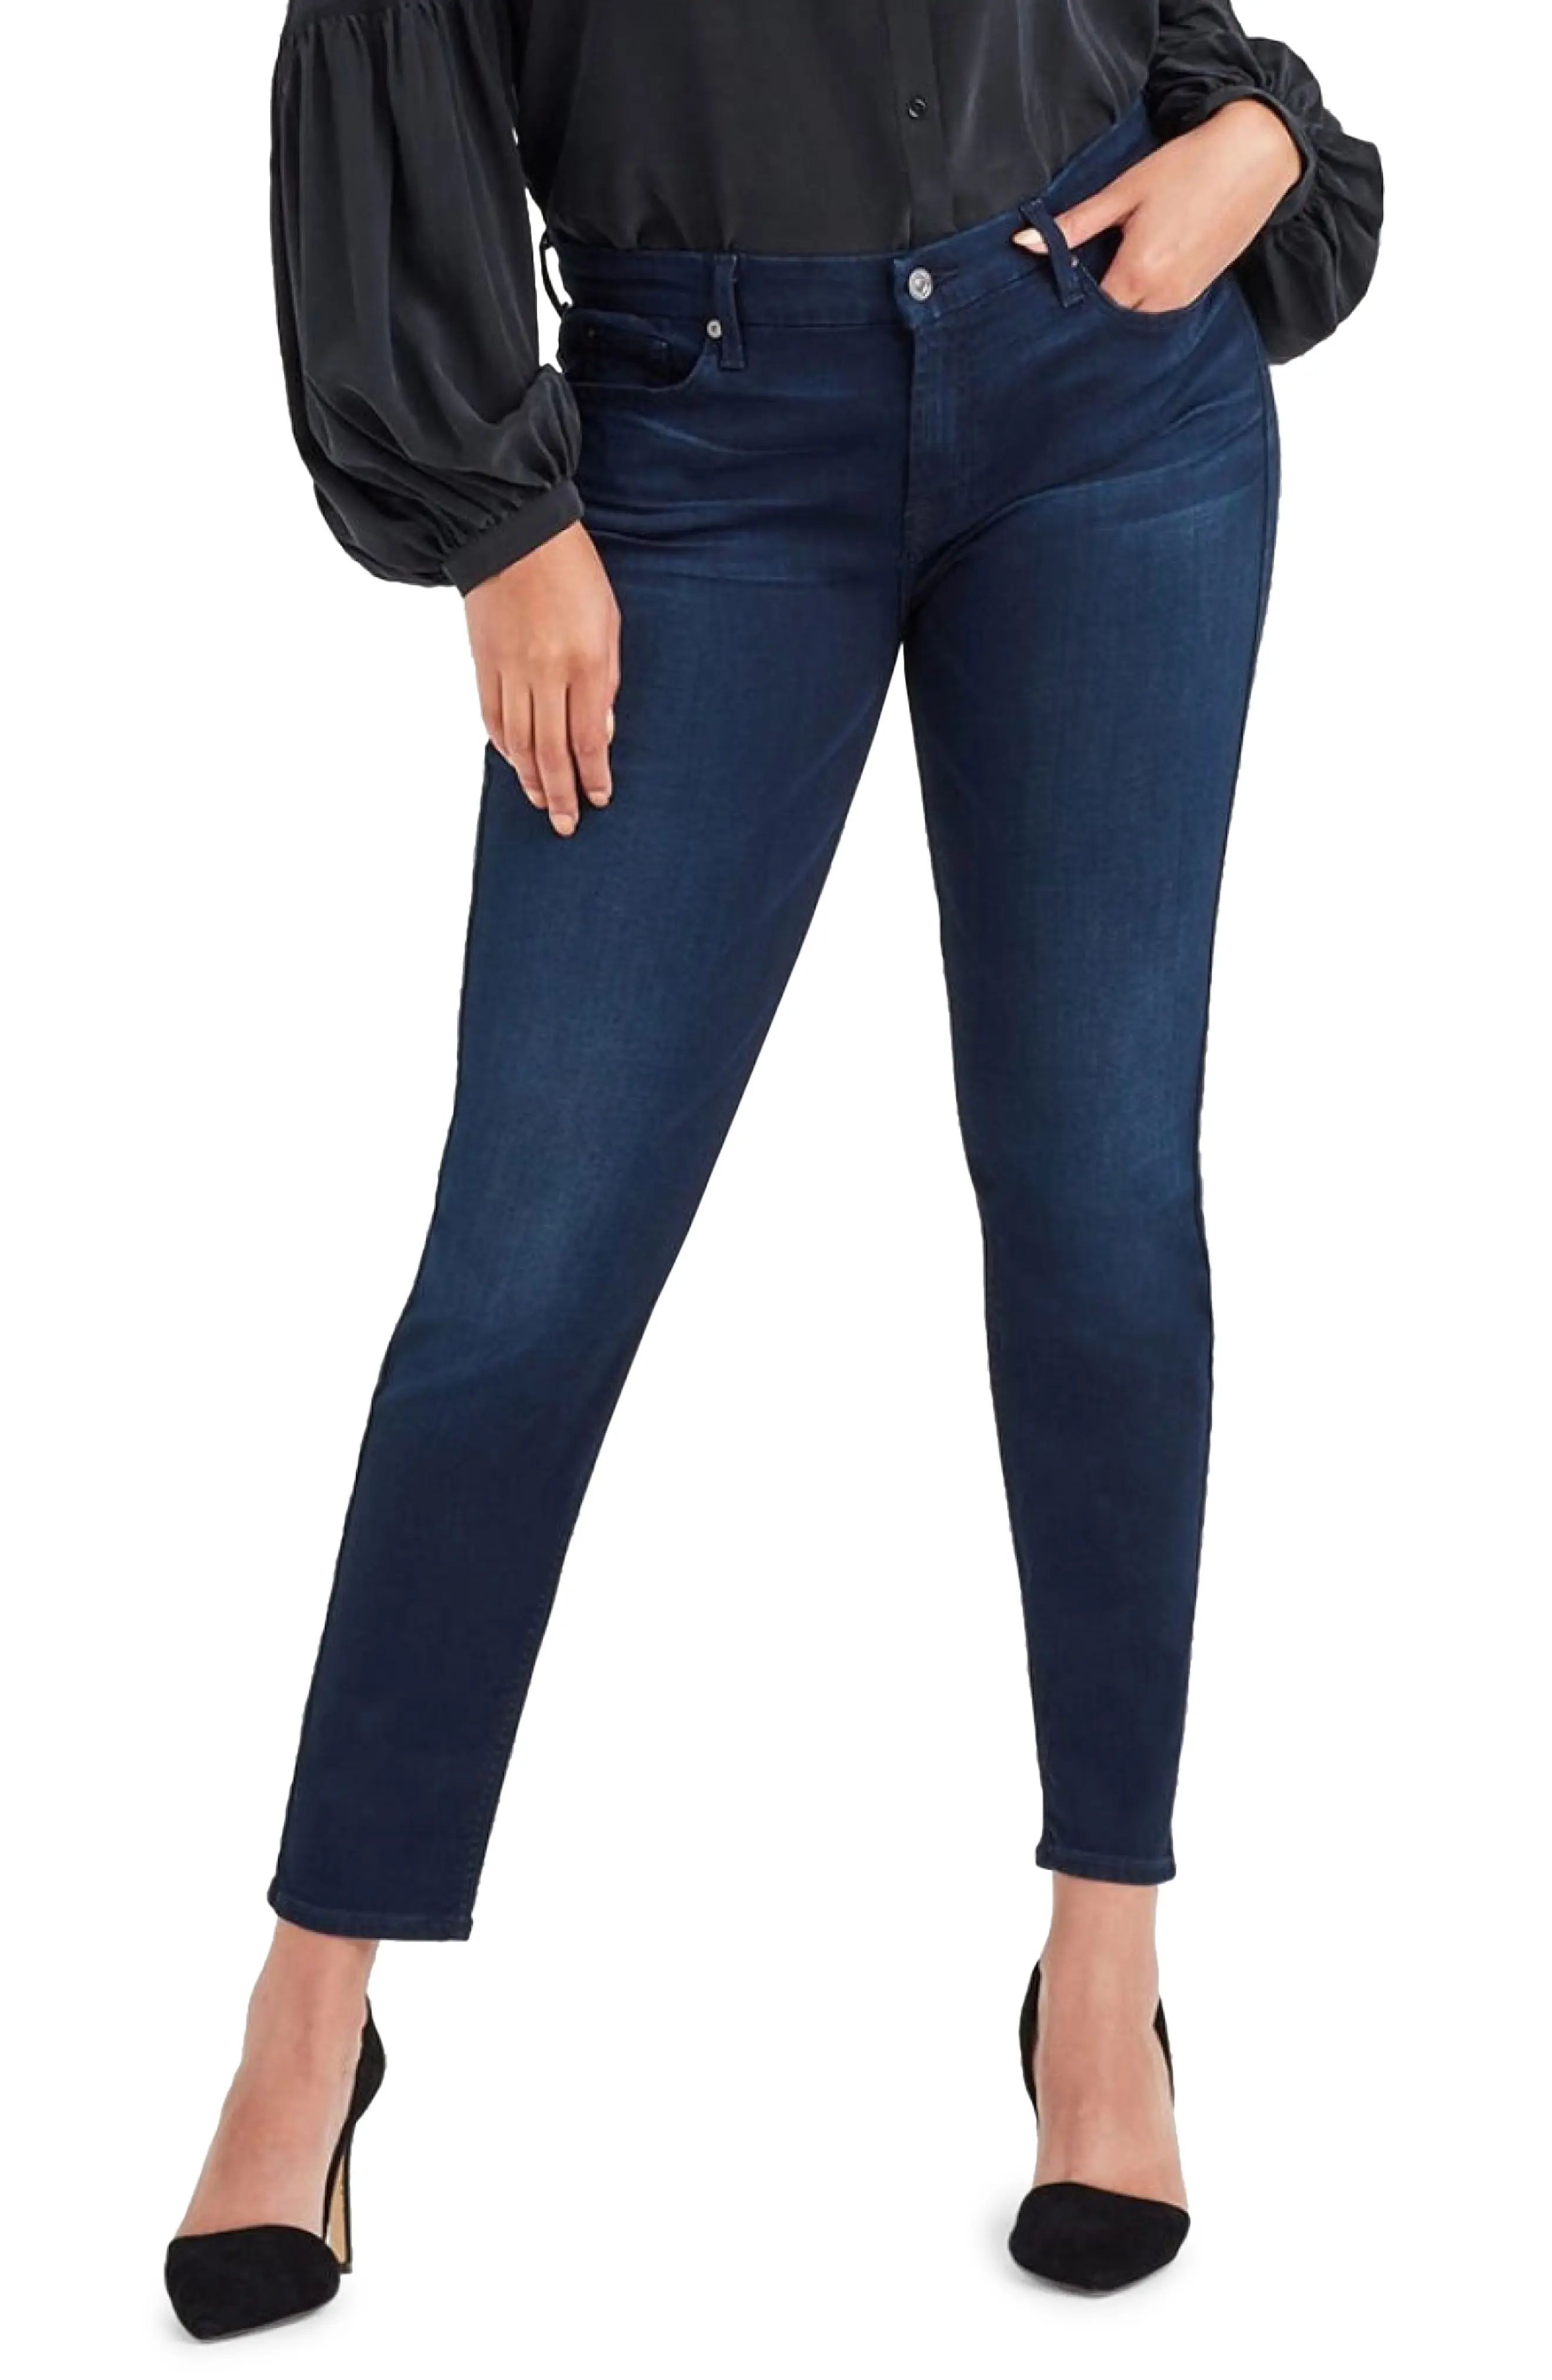 Women's 7 For All Mankind The Skinny Jeans, Size 28 - Blue | Nordstrom